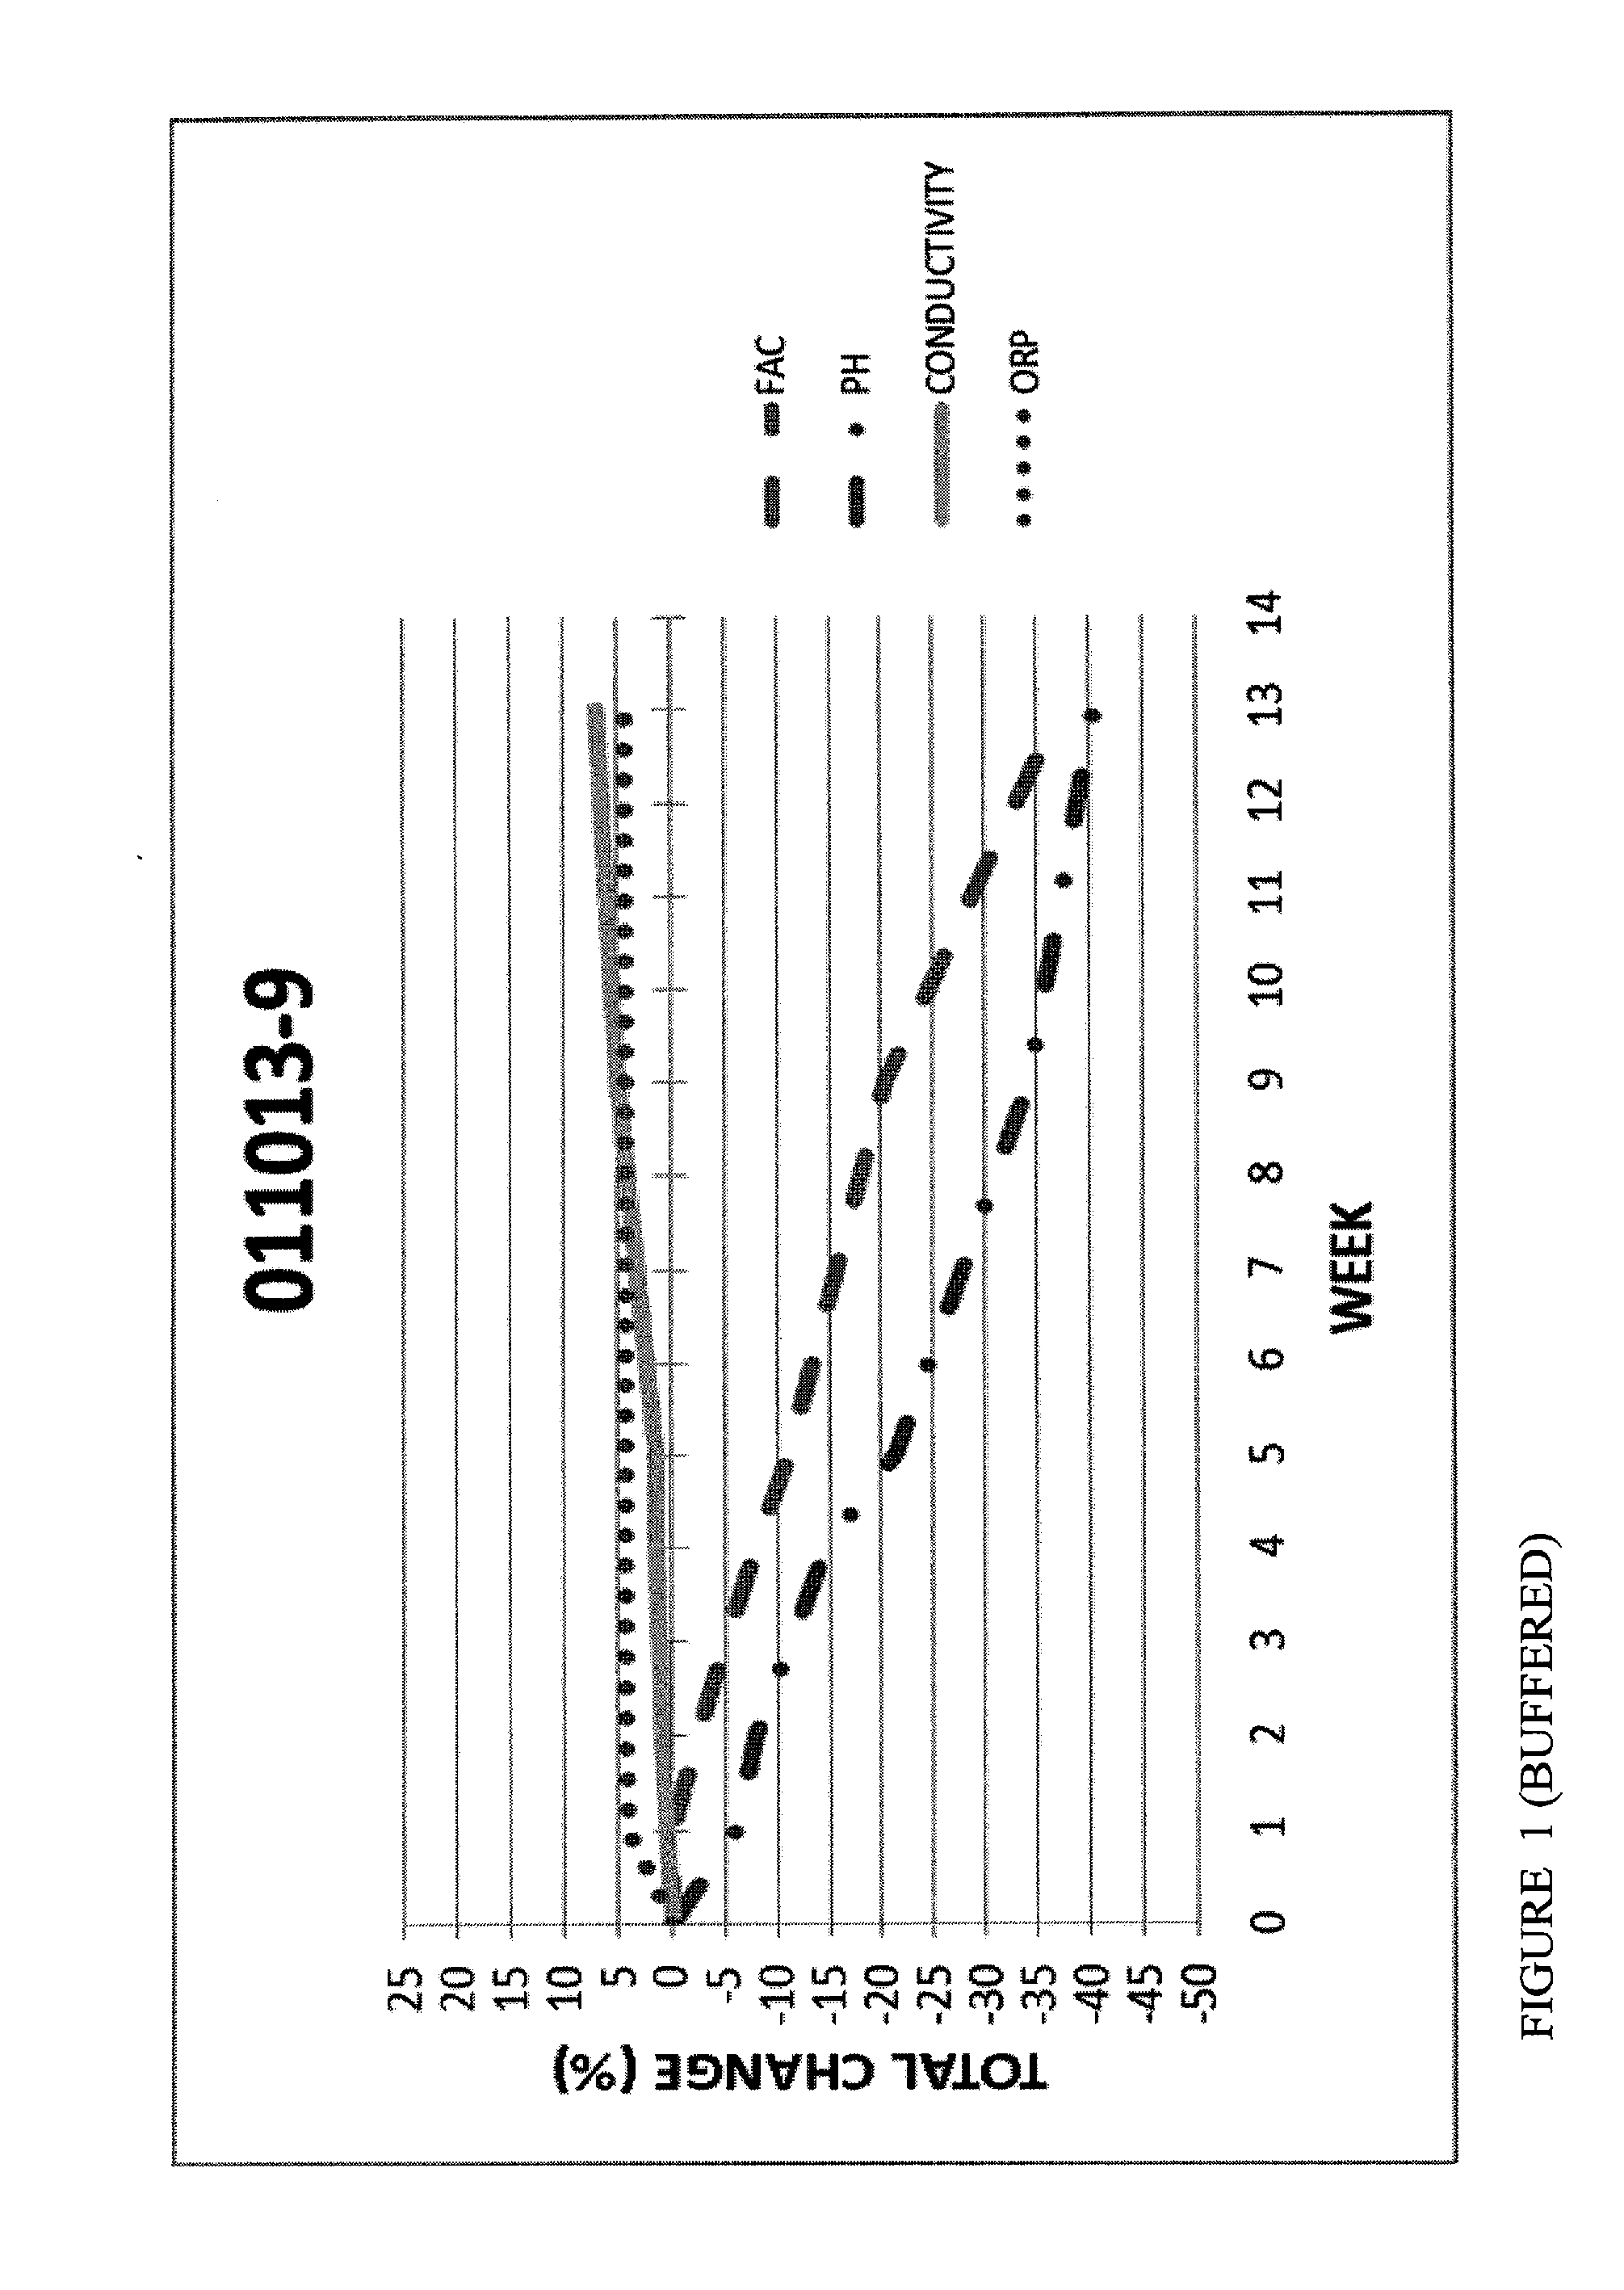 METHOD FOR STABILIZING AN ELECTROCHEMICALLY GENERATED SANITIZING SOLUTION HAVING A PREDETERMINED LEVEL OF FREE AVAILABLE CHLORINE AND pH